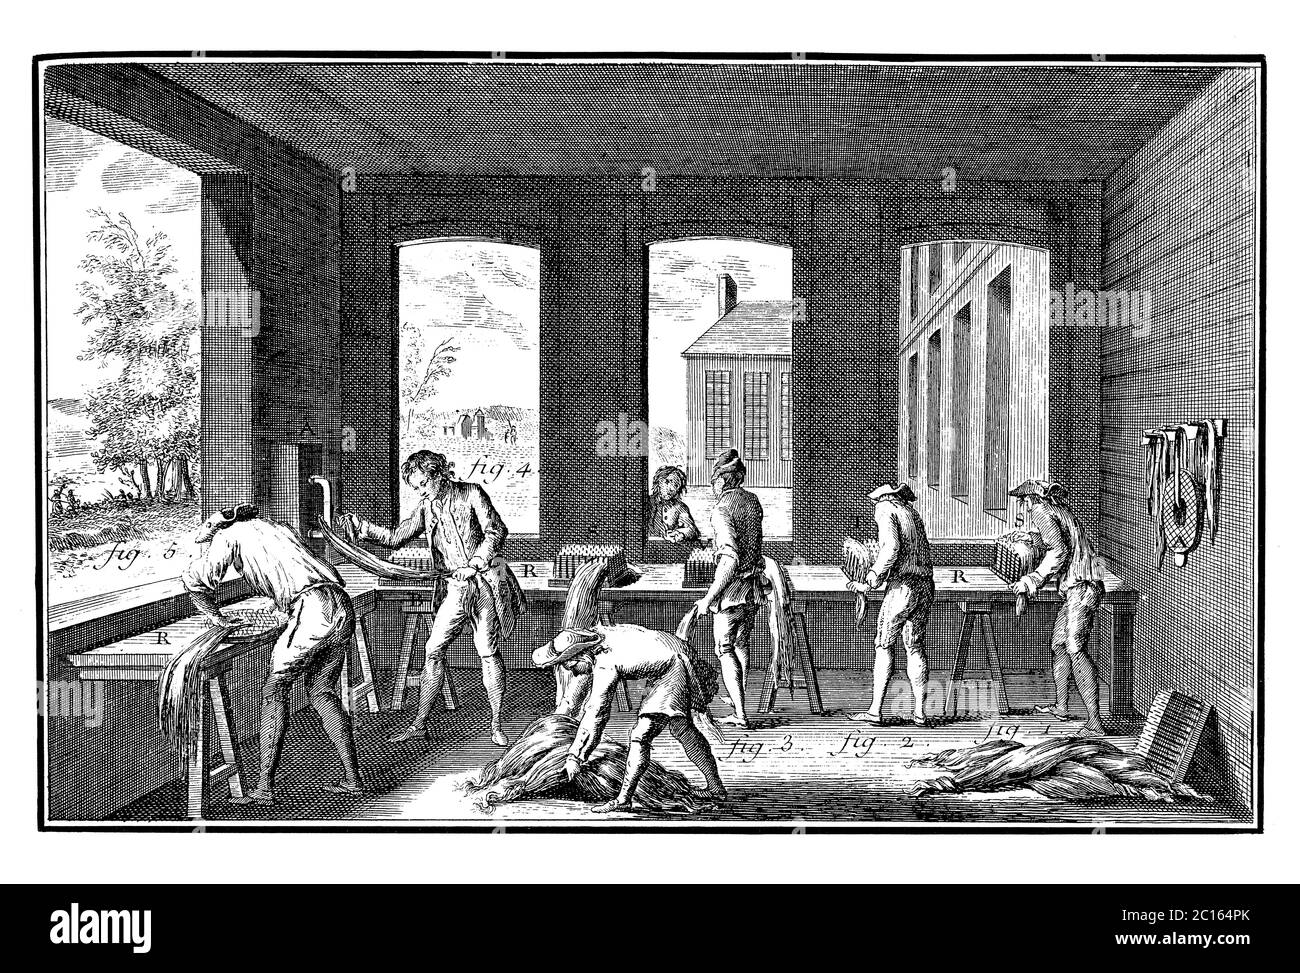 18th century illustration of preparing hemp or industrial cannabis for various. Published in 'A Diderot Pictorial Encyclopedia of Trades and Industry Stock Photo